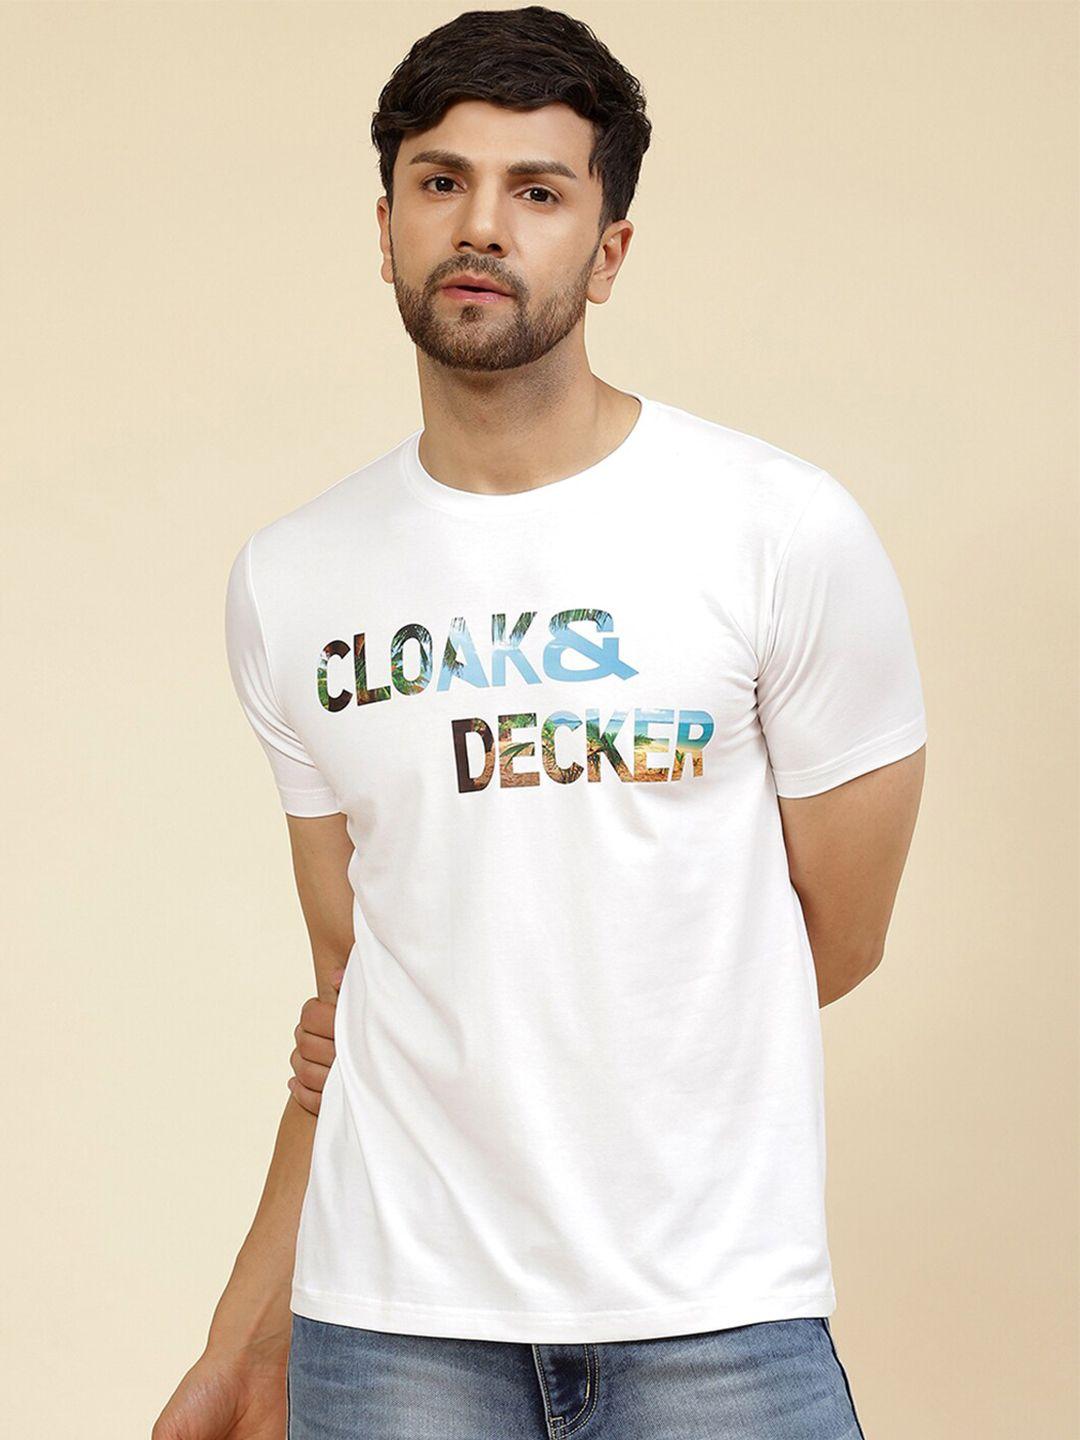 cloak & decker by monte carlo typography printed cotton t-shirt